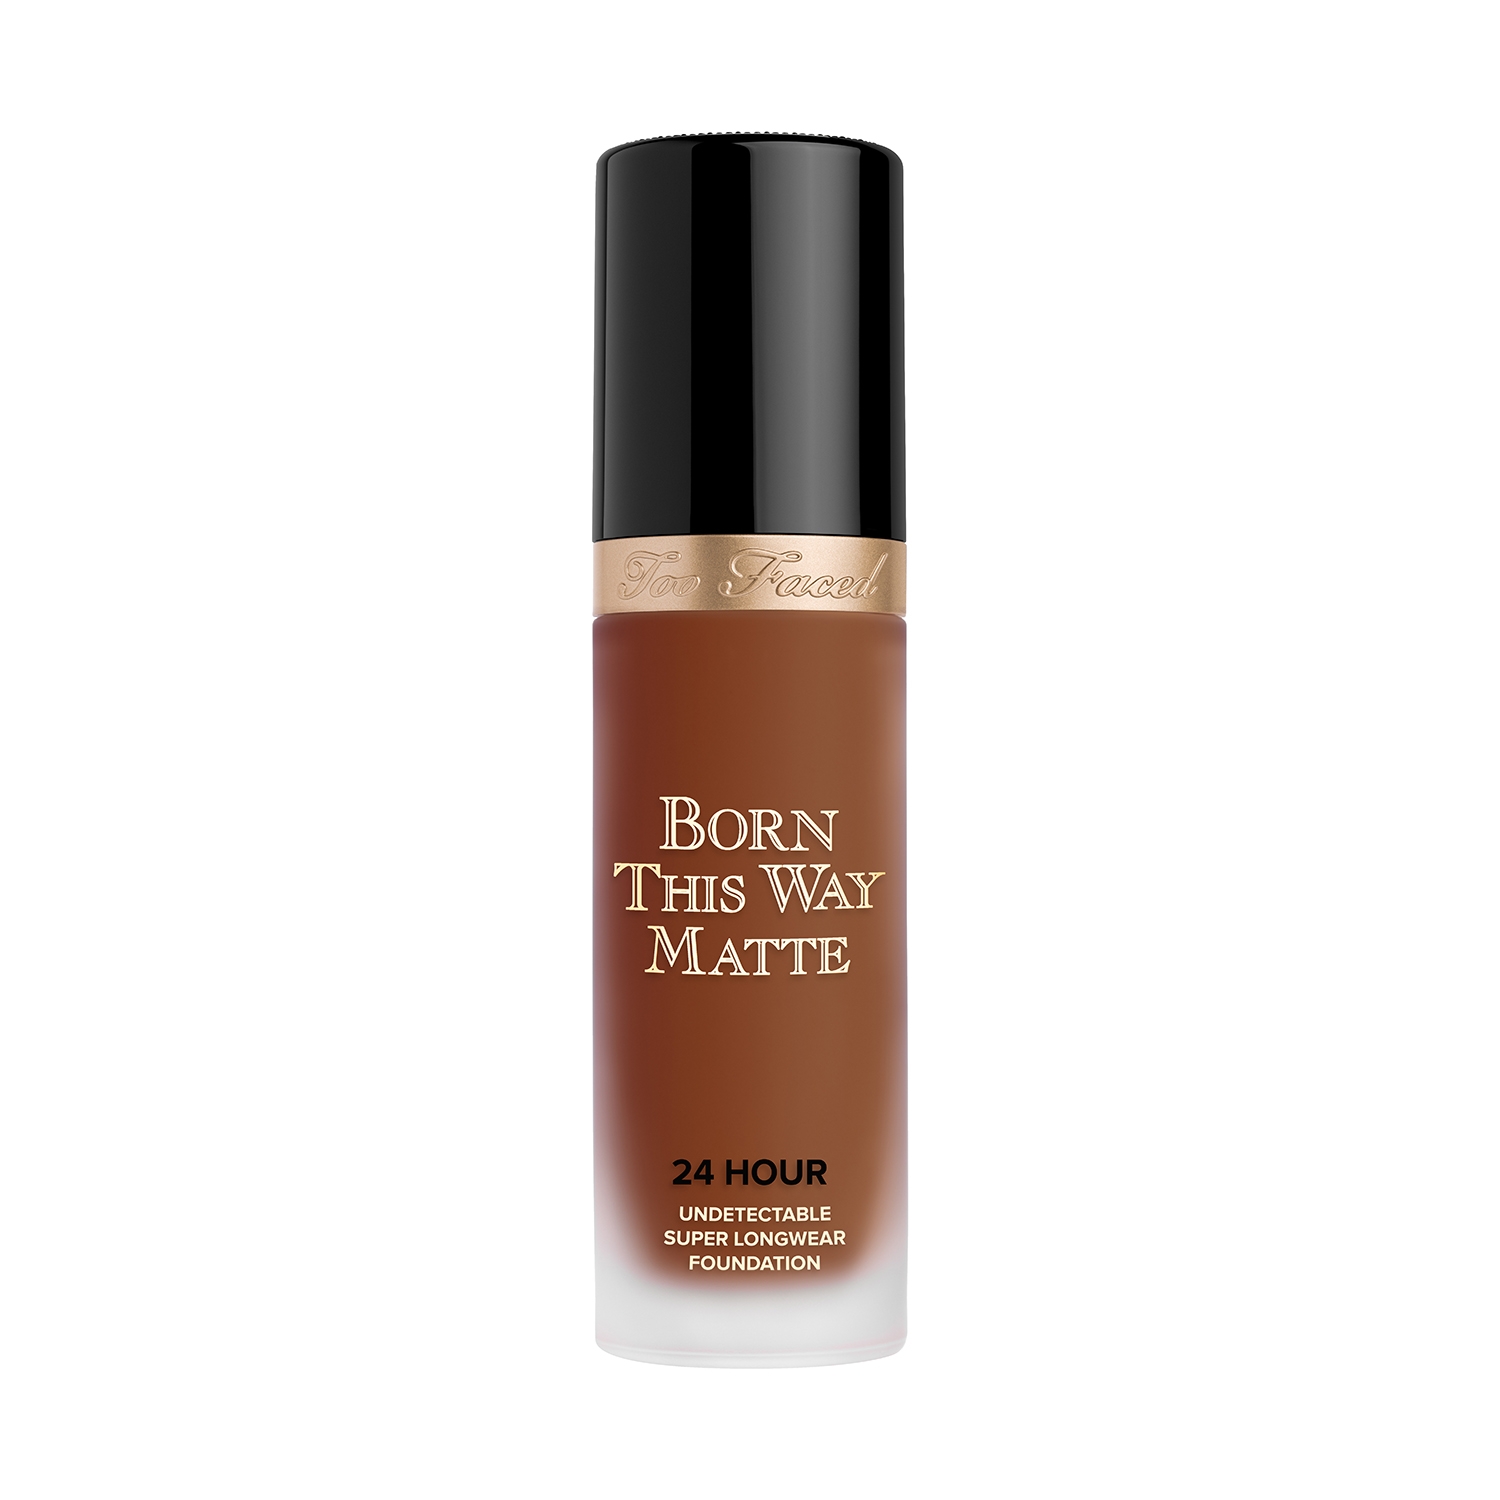 Too Faced | Too Faced Born This Way Matte Foundation - Ganache (30ml)